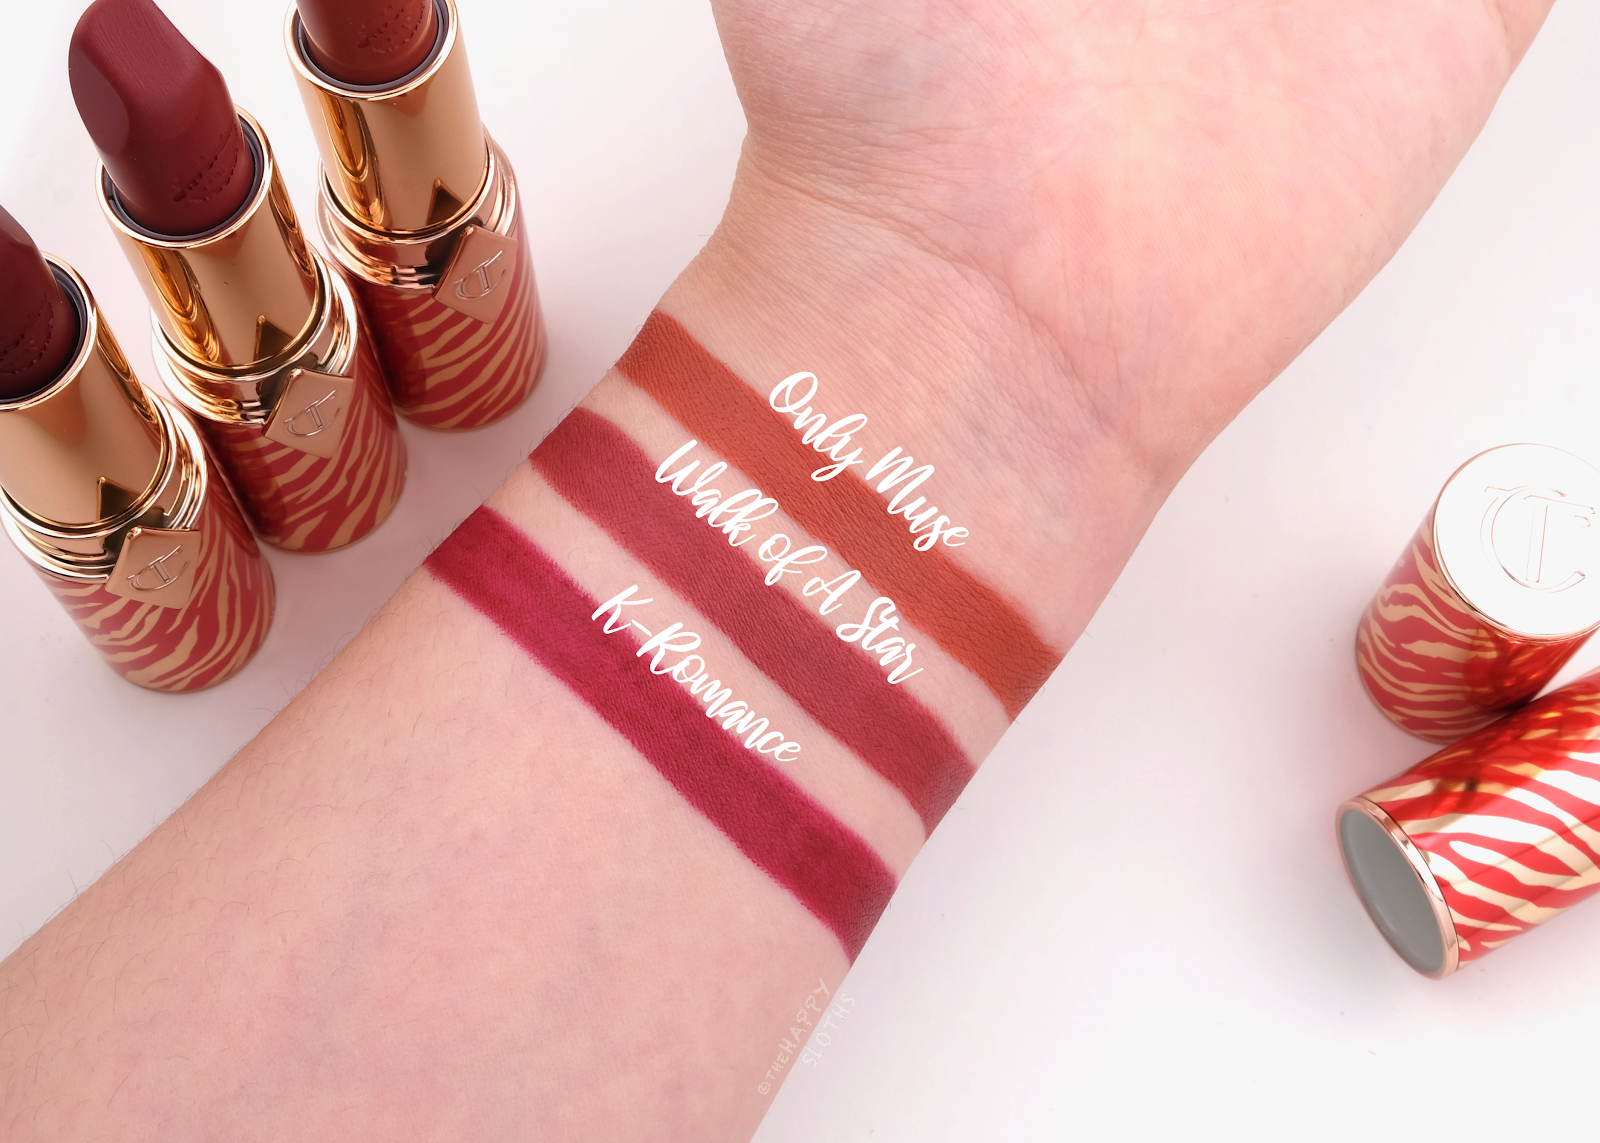 Charlotte Tilbury | Lunar New Year 2022 Matte Revolution Lipstick: Review and Swatches